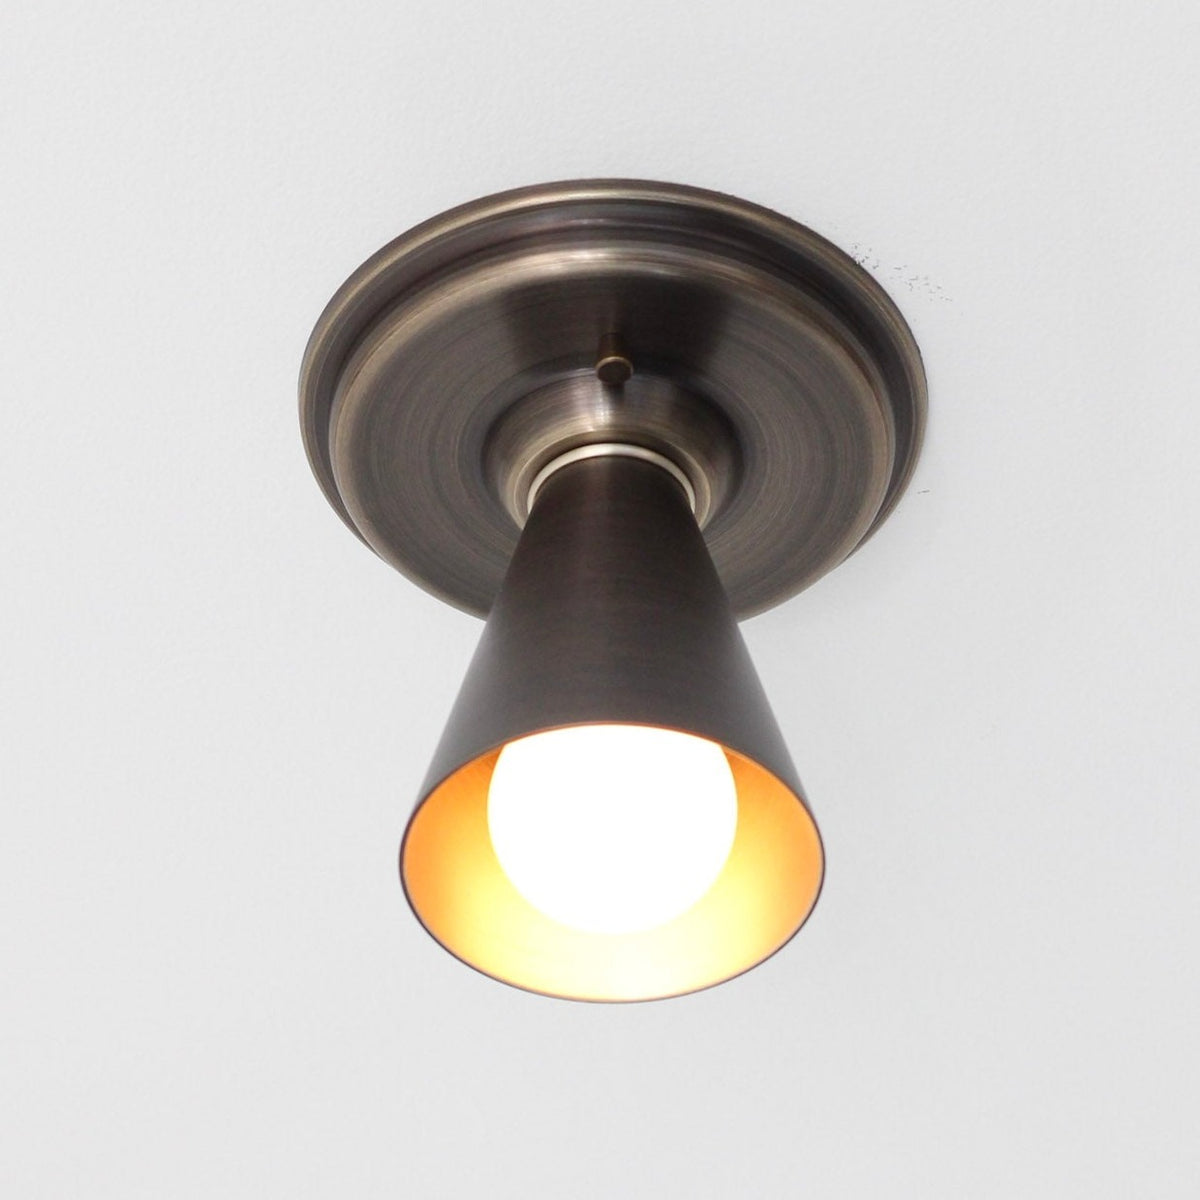 Ceiling fixture for low ceilings